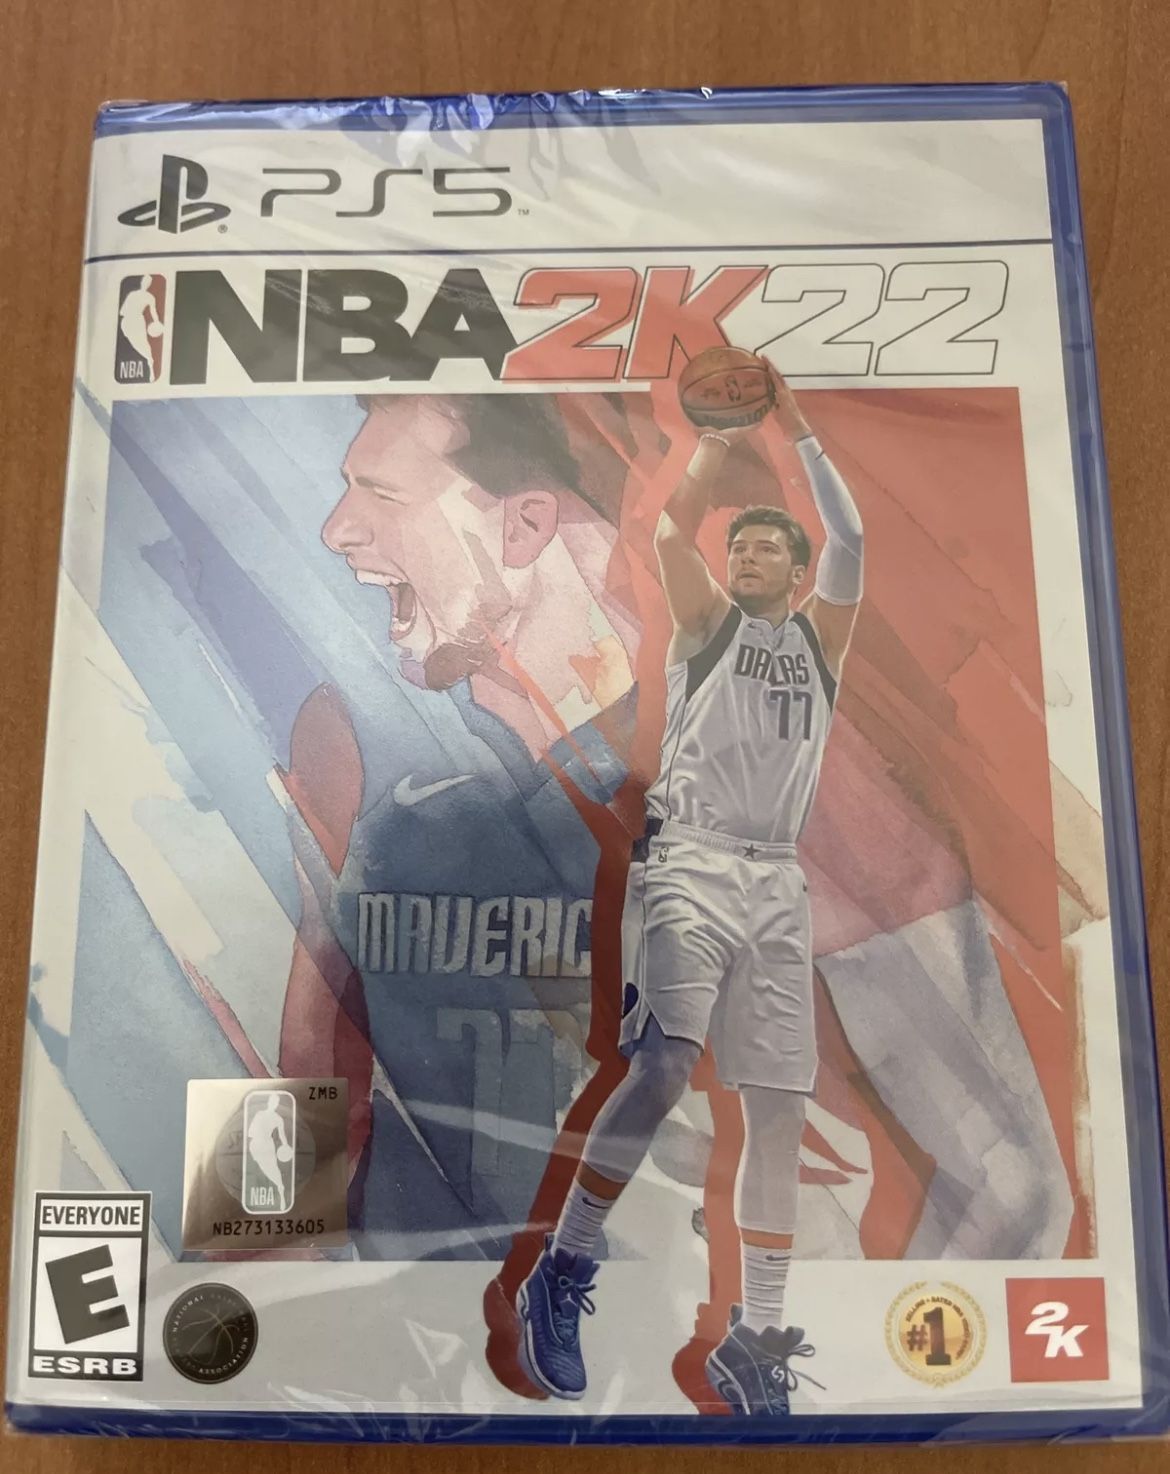 Sony PlayStation 5 PS5 - NBA 2K22 - Luka Doncic Edition - Brand New!